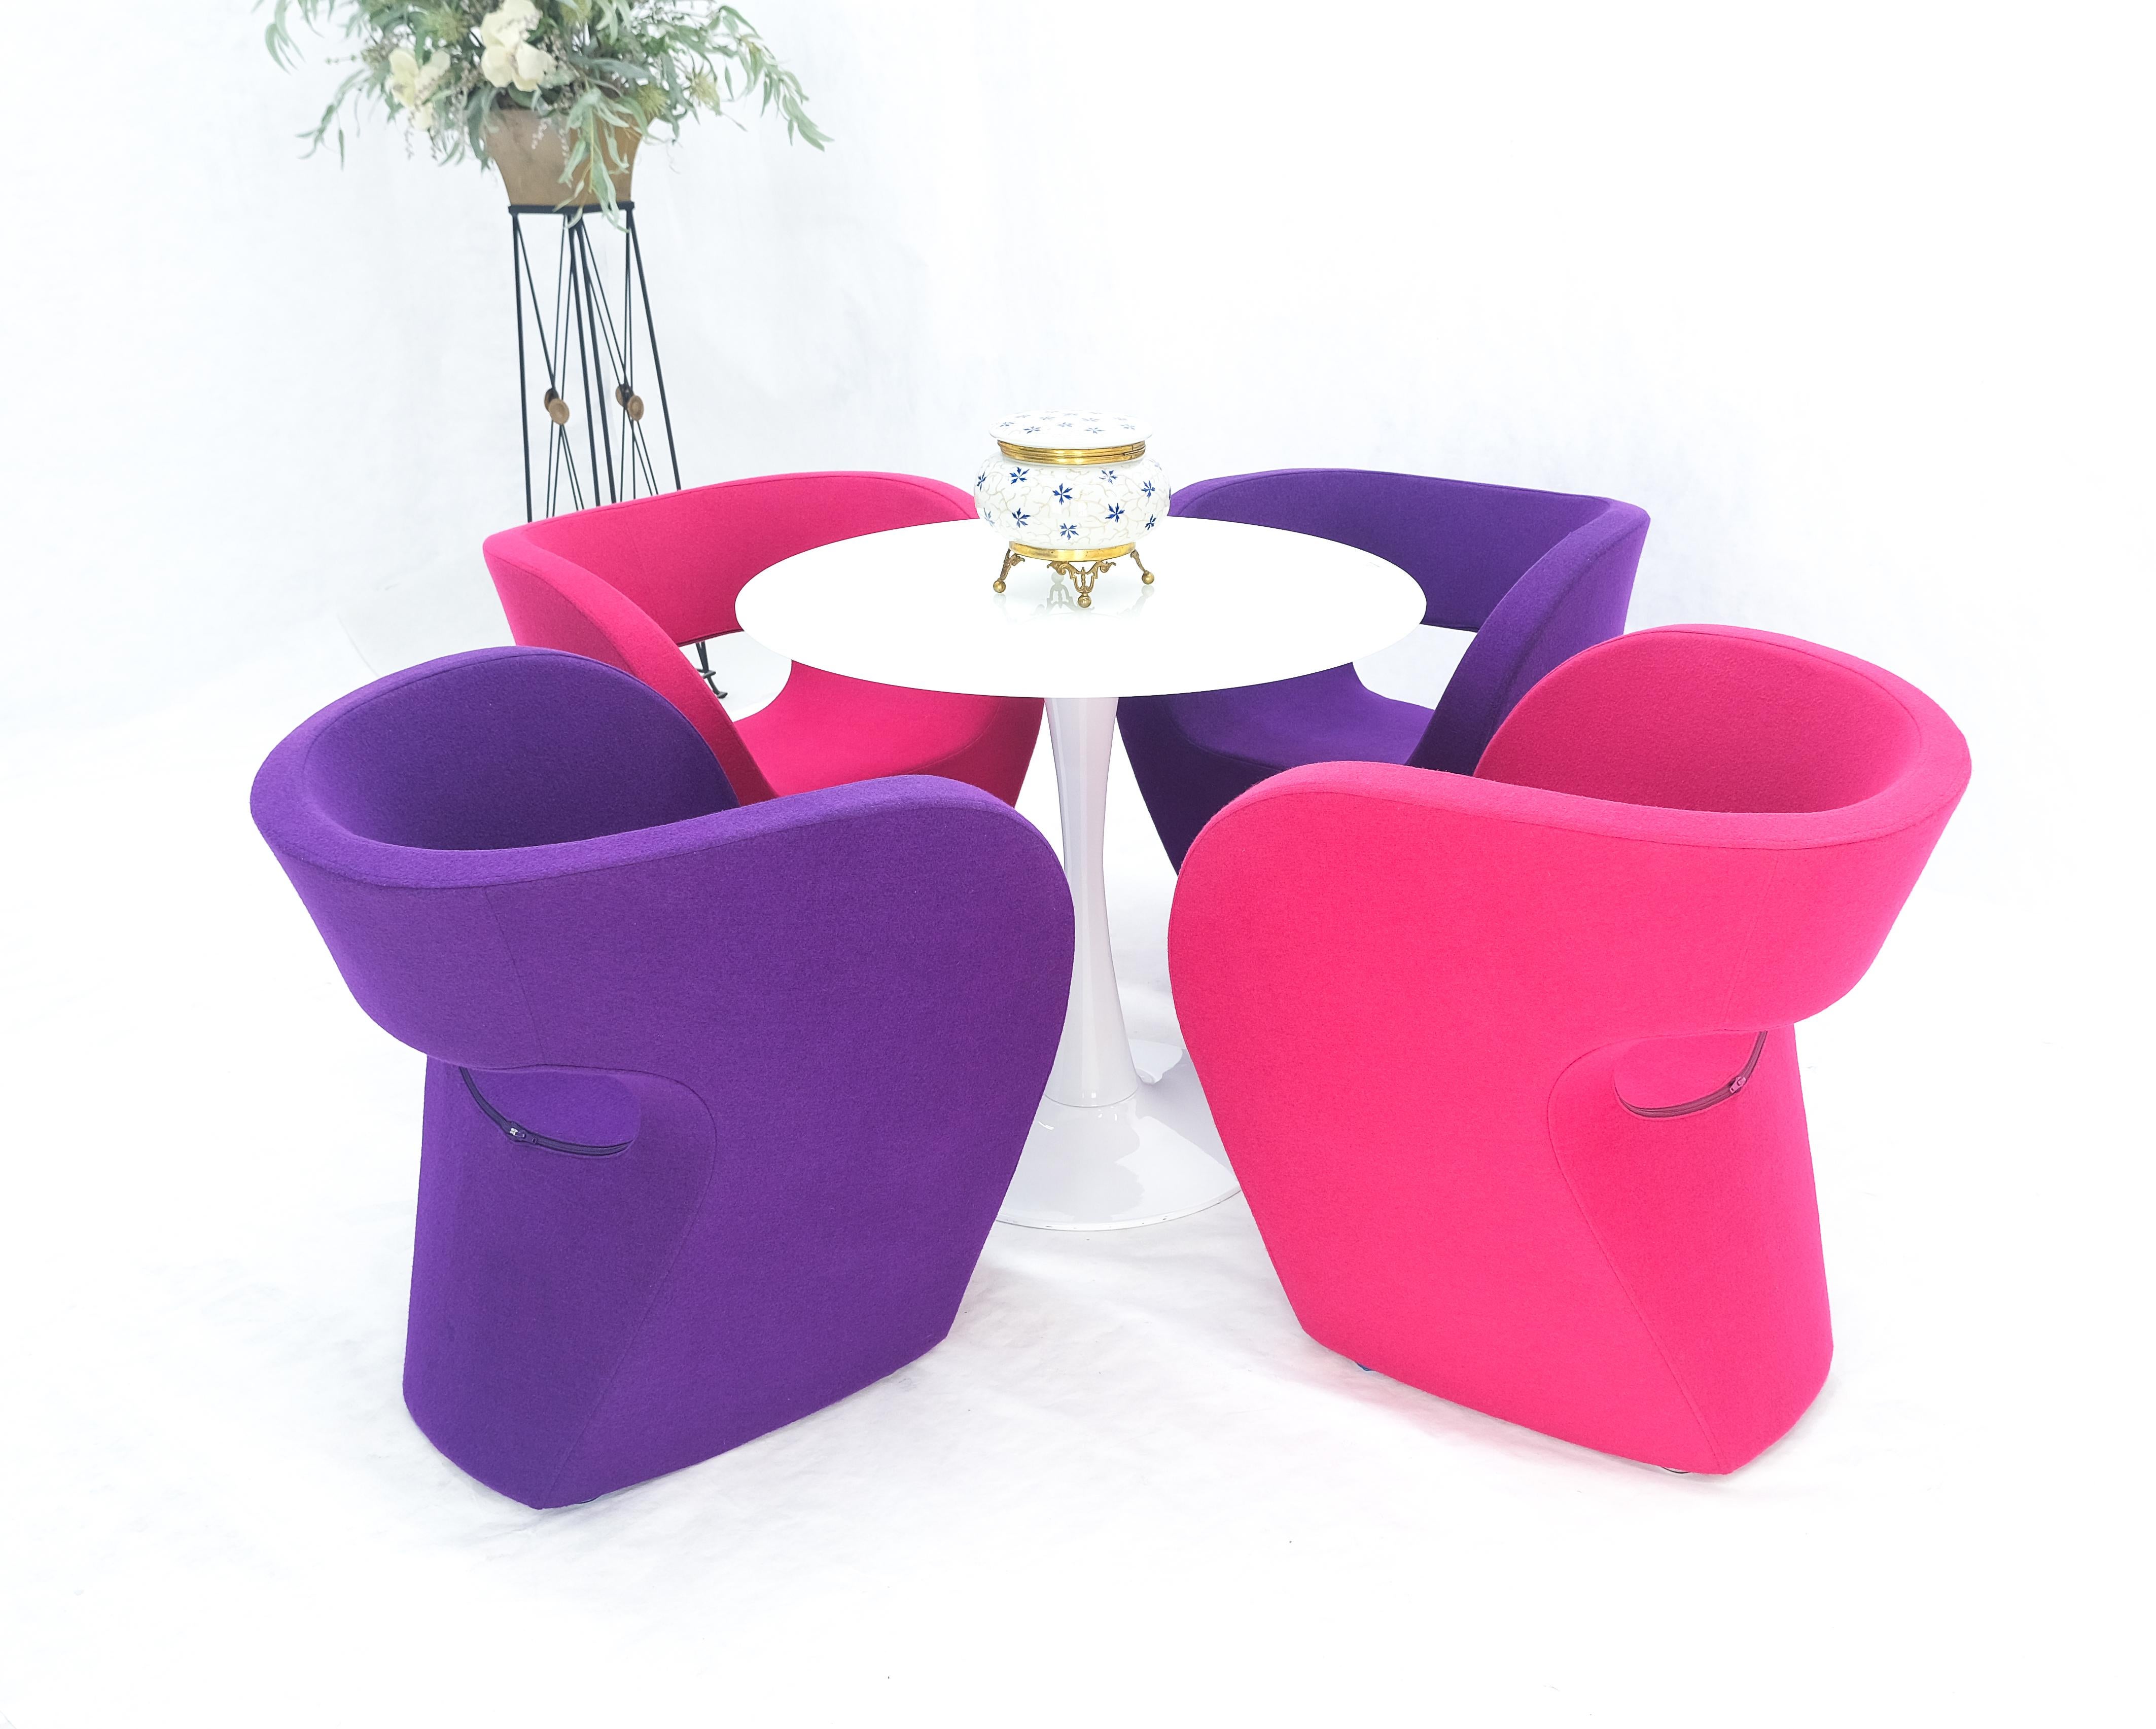 Set 4 Albert Armchair by Ron Arad for Moroso Purple & Red Wool Upholstery MINT! For Sale 8